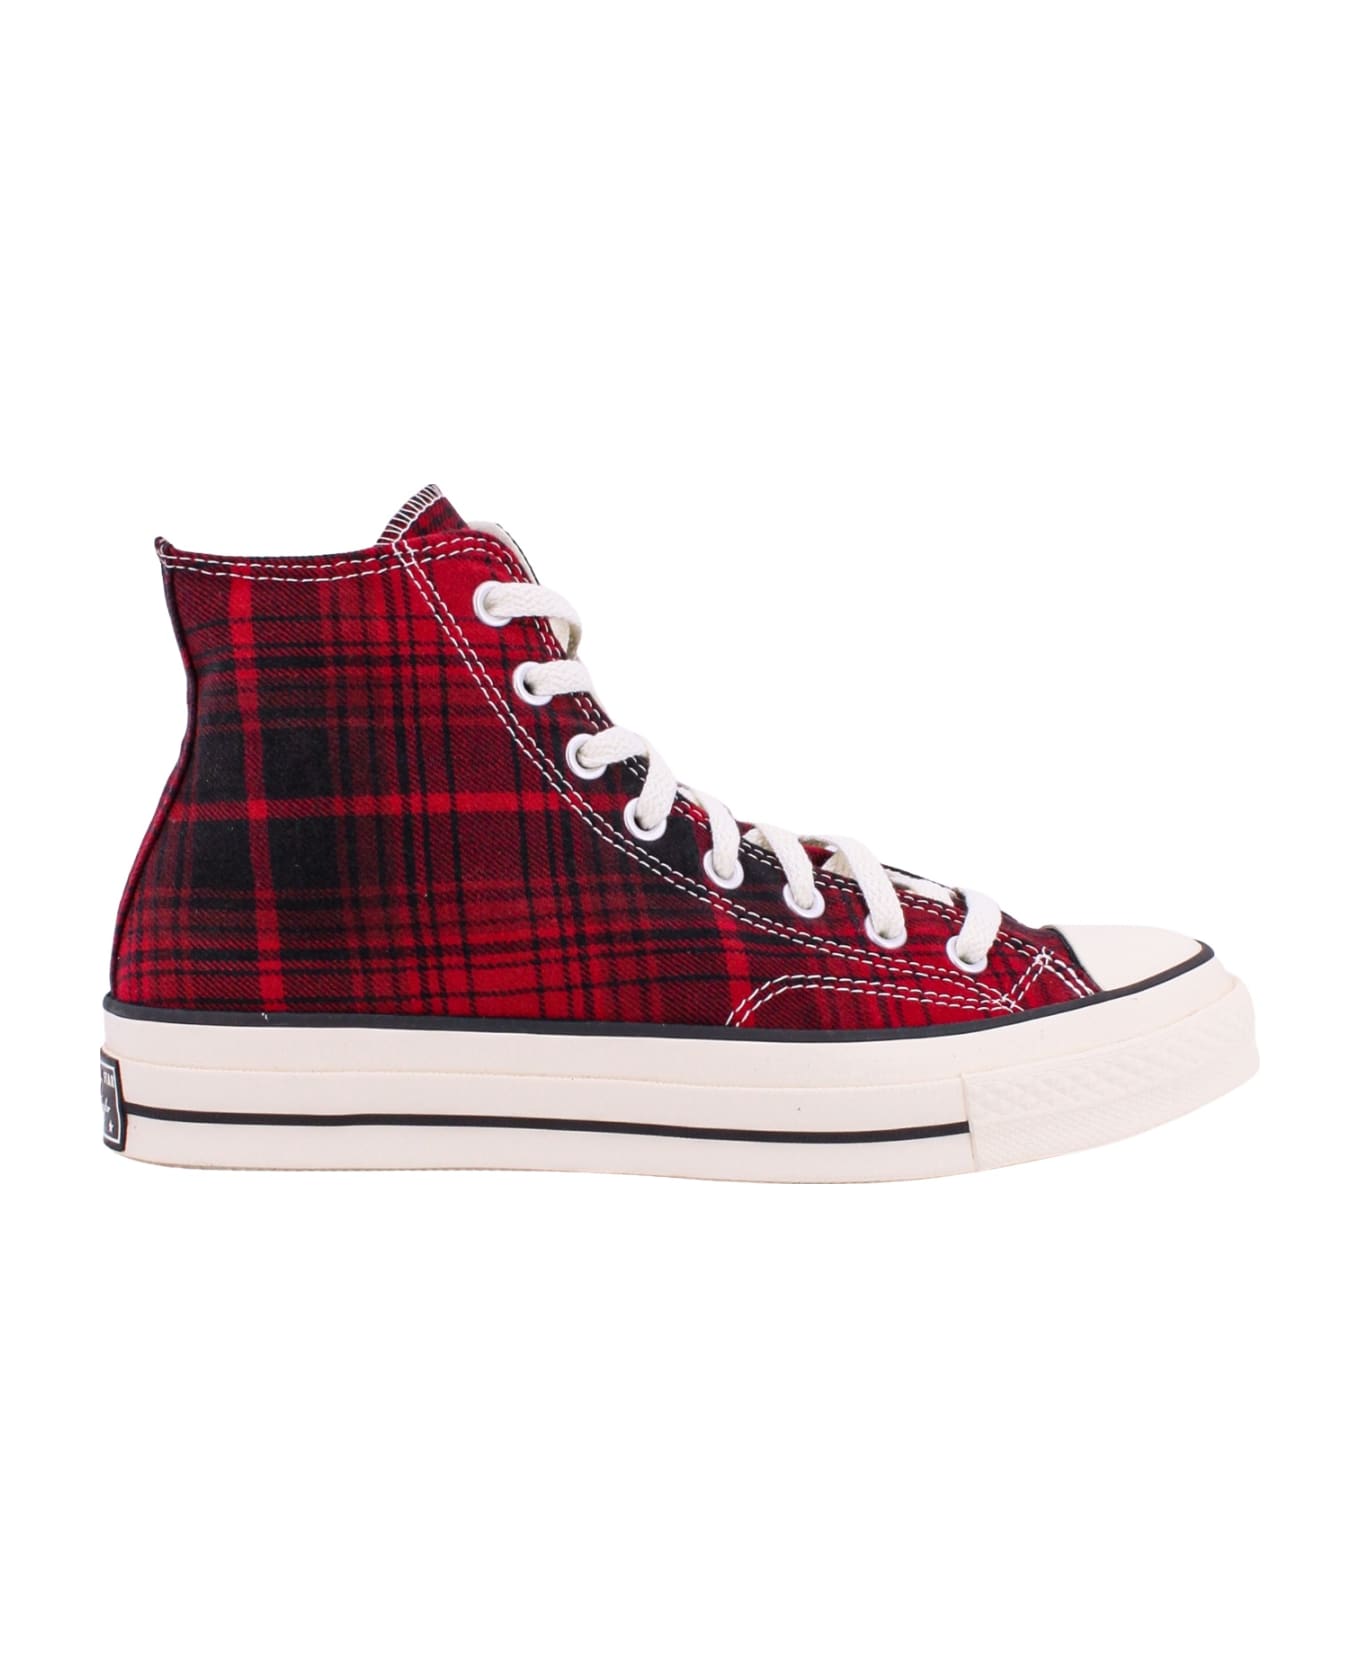 Converse Sneakers - Red